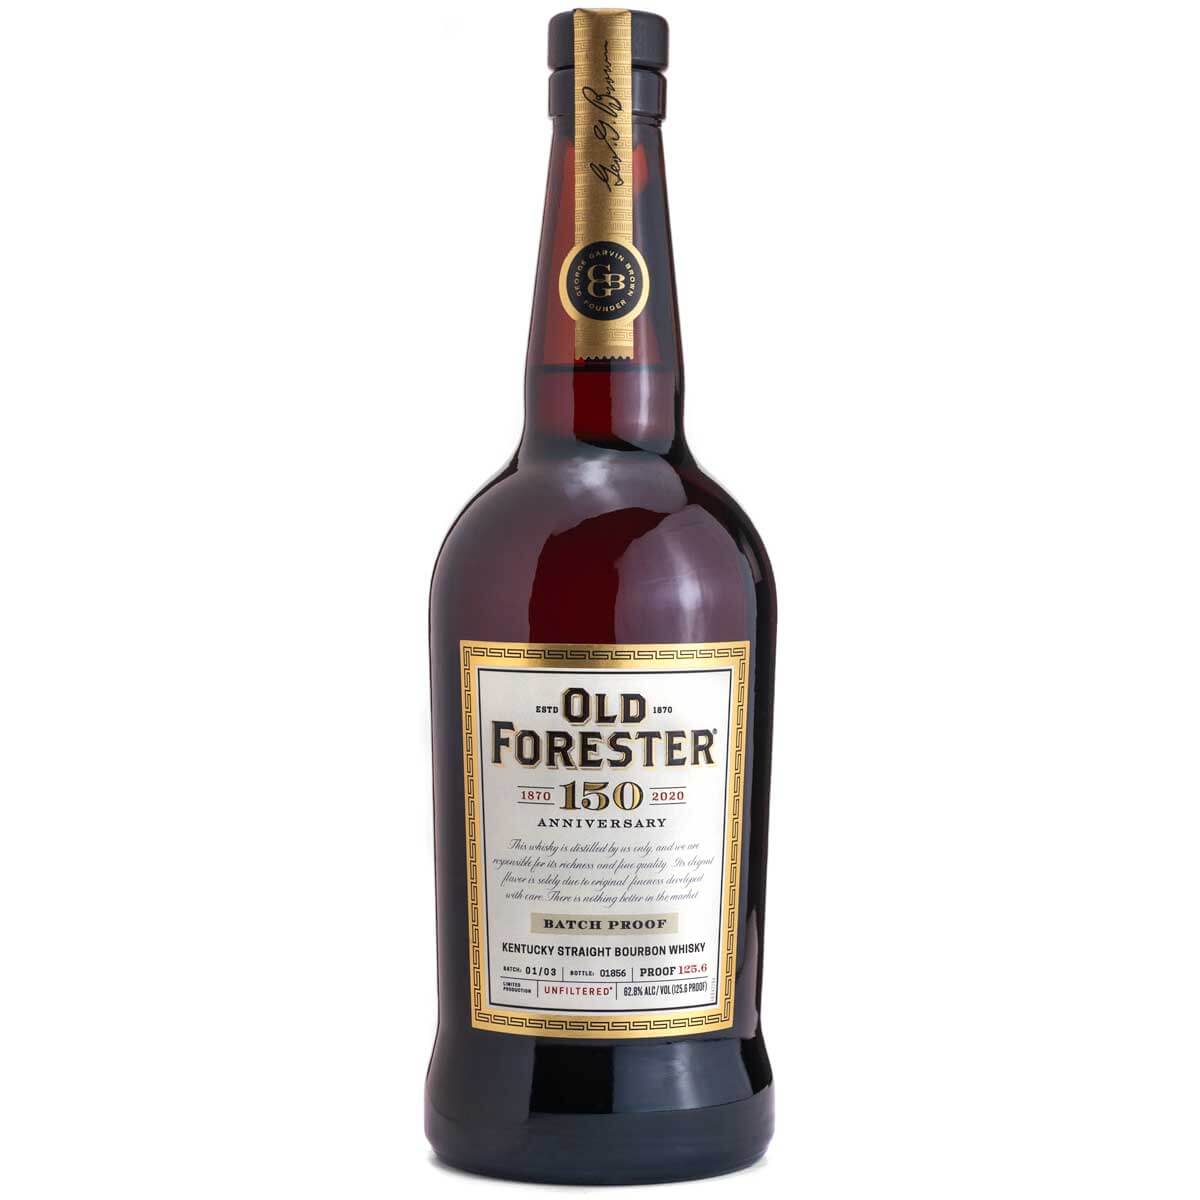 Old Forester 150th Anniversary Bourbon bottle